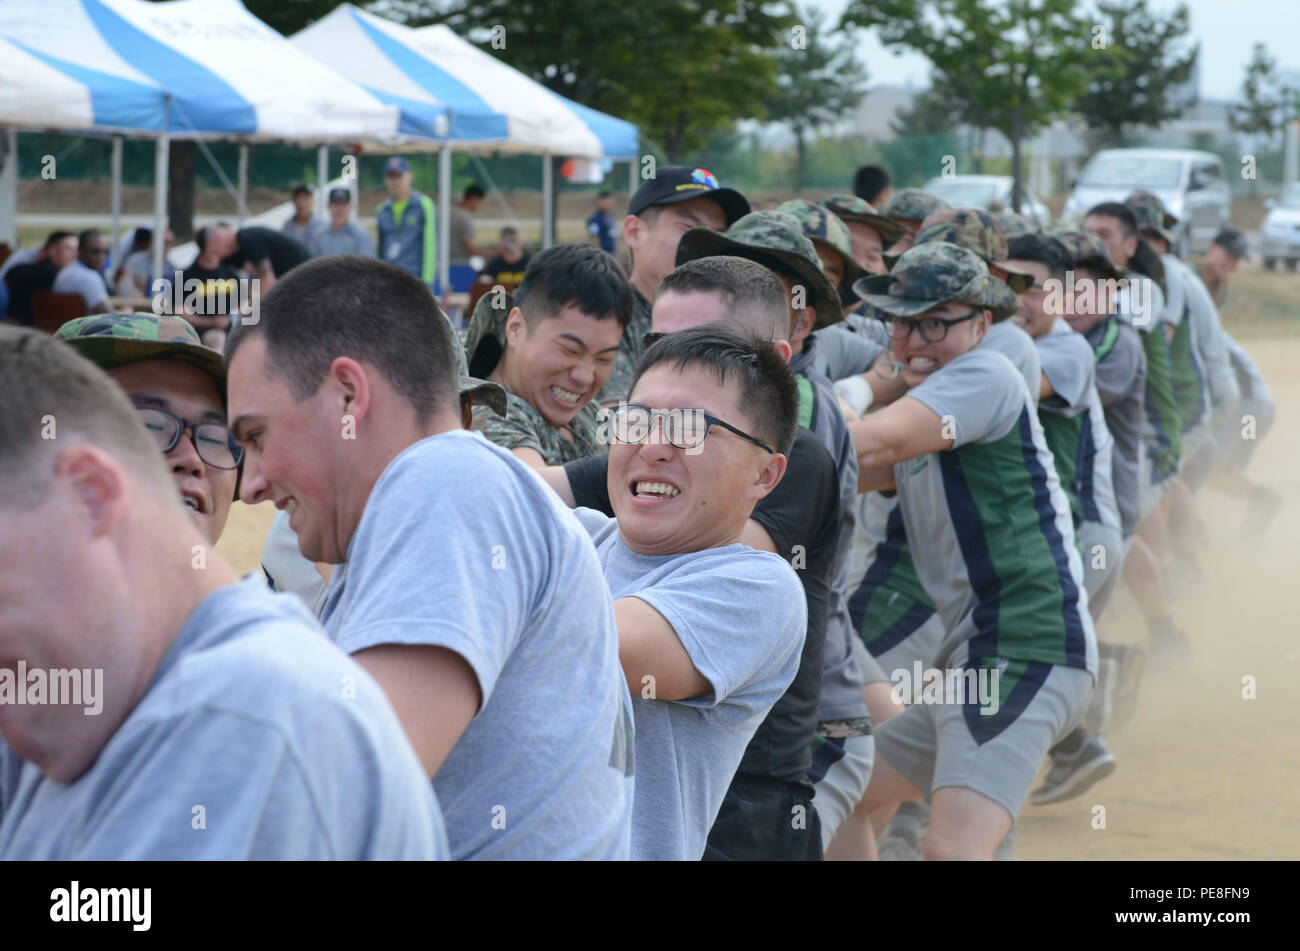 Republic of Korea Army and U.S. Army Soldiers strain at the rope during a game of tug-of-war held during a sports competition and cultural exchange hosted by the ROK Army’s 1-58th Engineer Battalion at a ROK Army base near Bucheon, South Korea, to build friendship between the allied forces, Sept. 30, 2015.(U.S. Army photo by Staff Sgt. John Healy, 2ABCT PAO, 1st Cavalry Division) Stock Photo